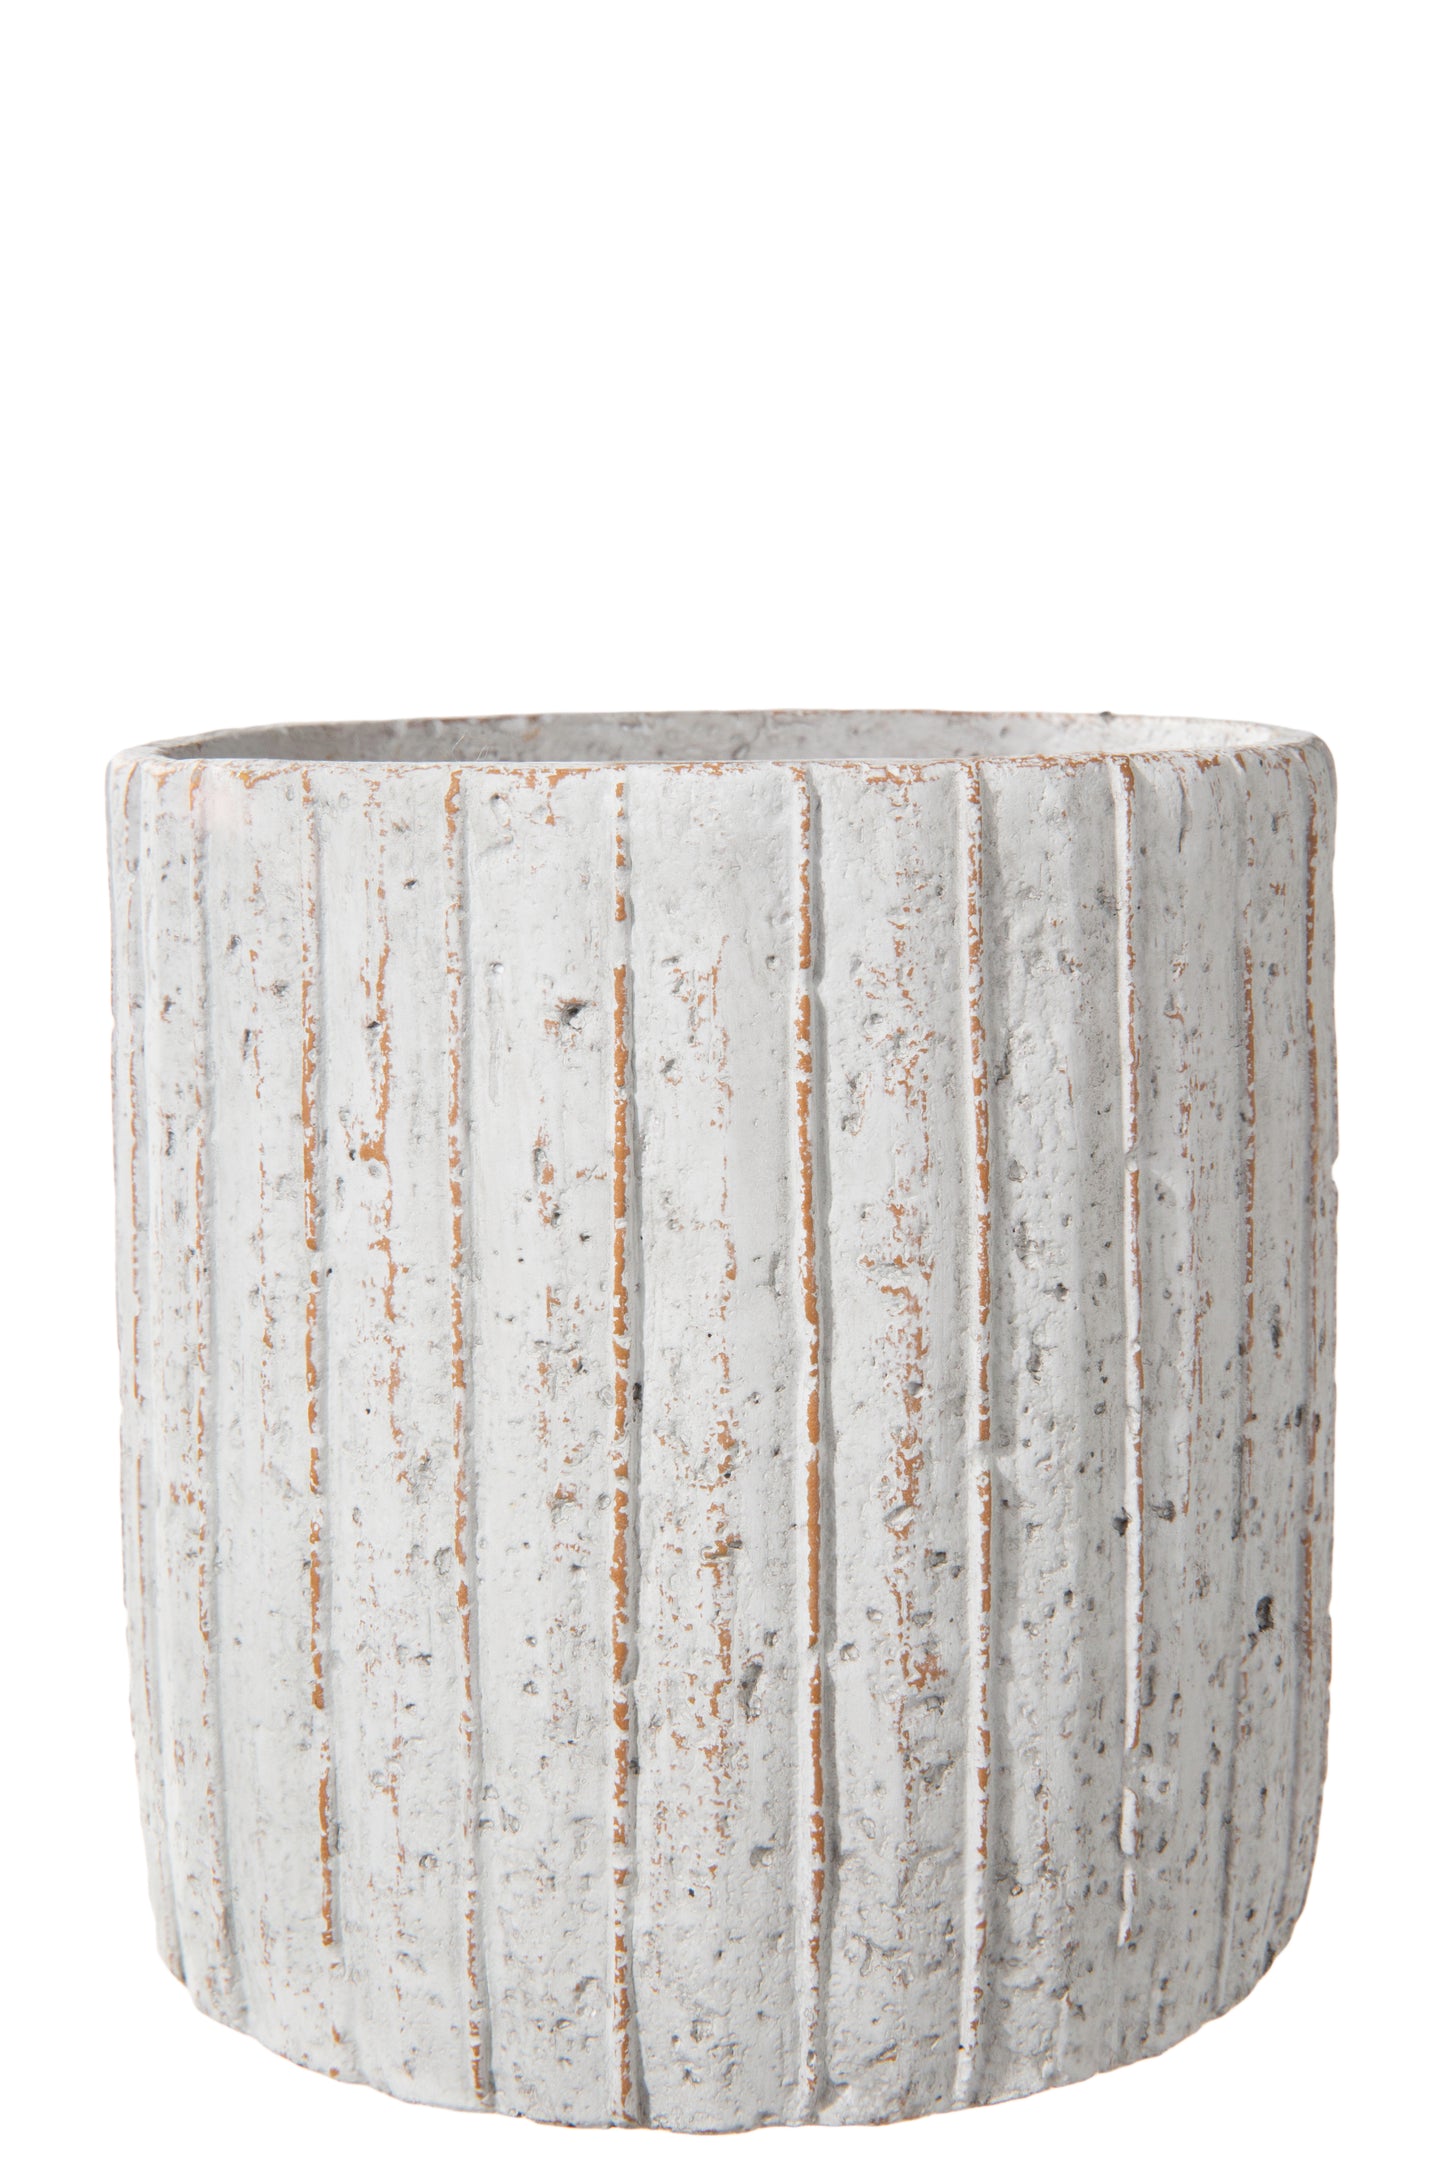 Cement Round Pot with Vertical Line Pattern Design Body